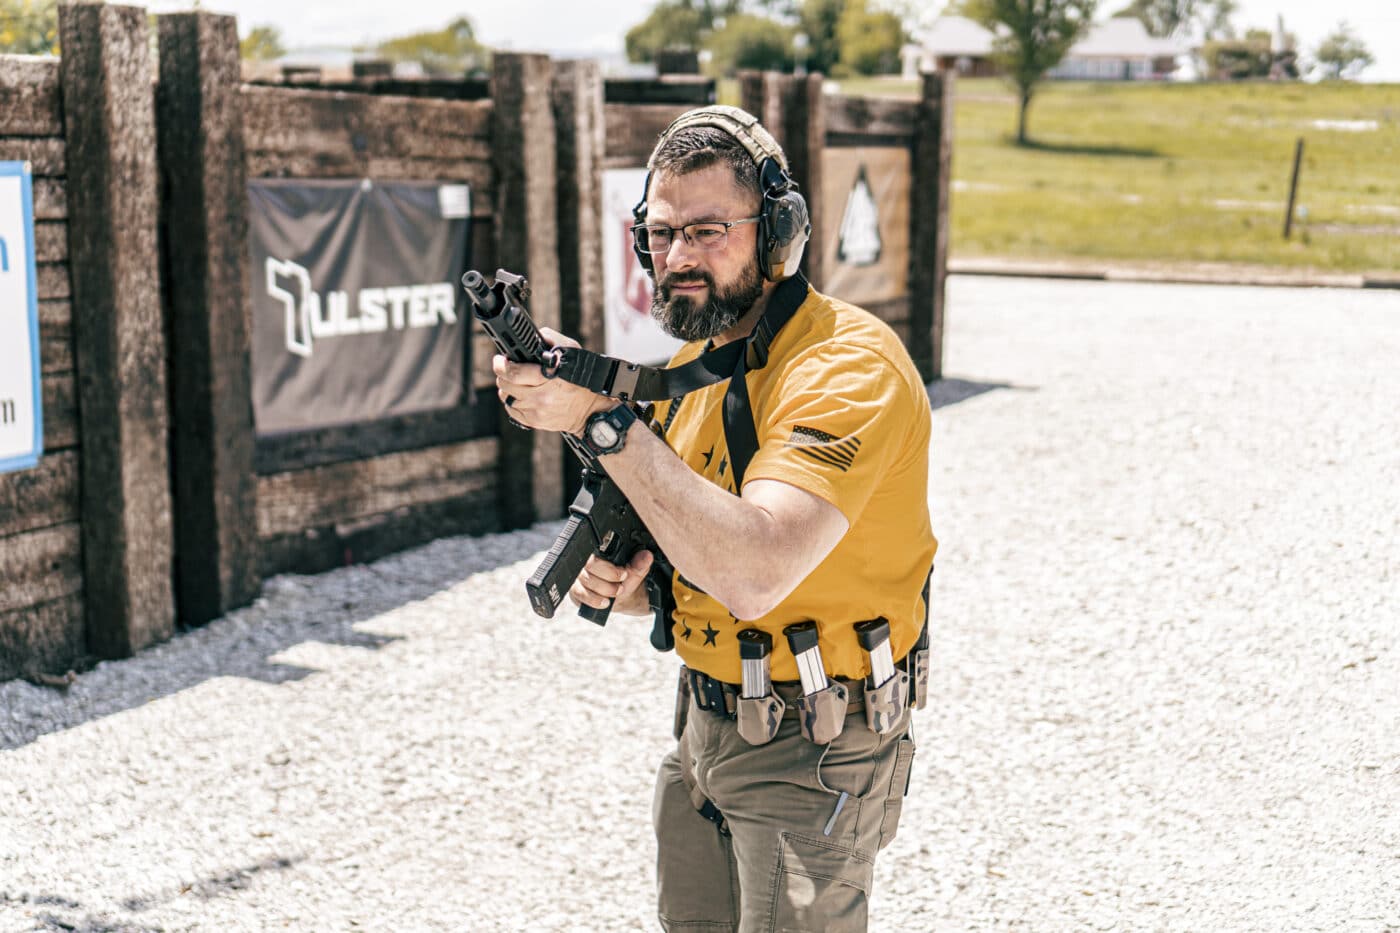 Man holding rifle in muzzle up ready position